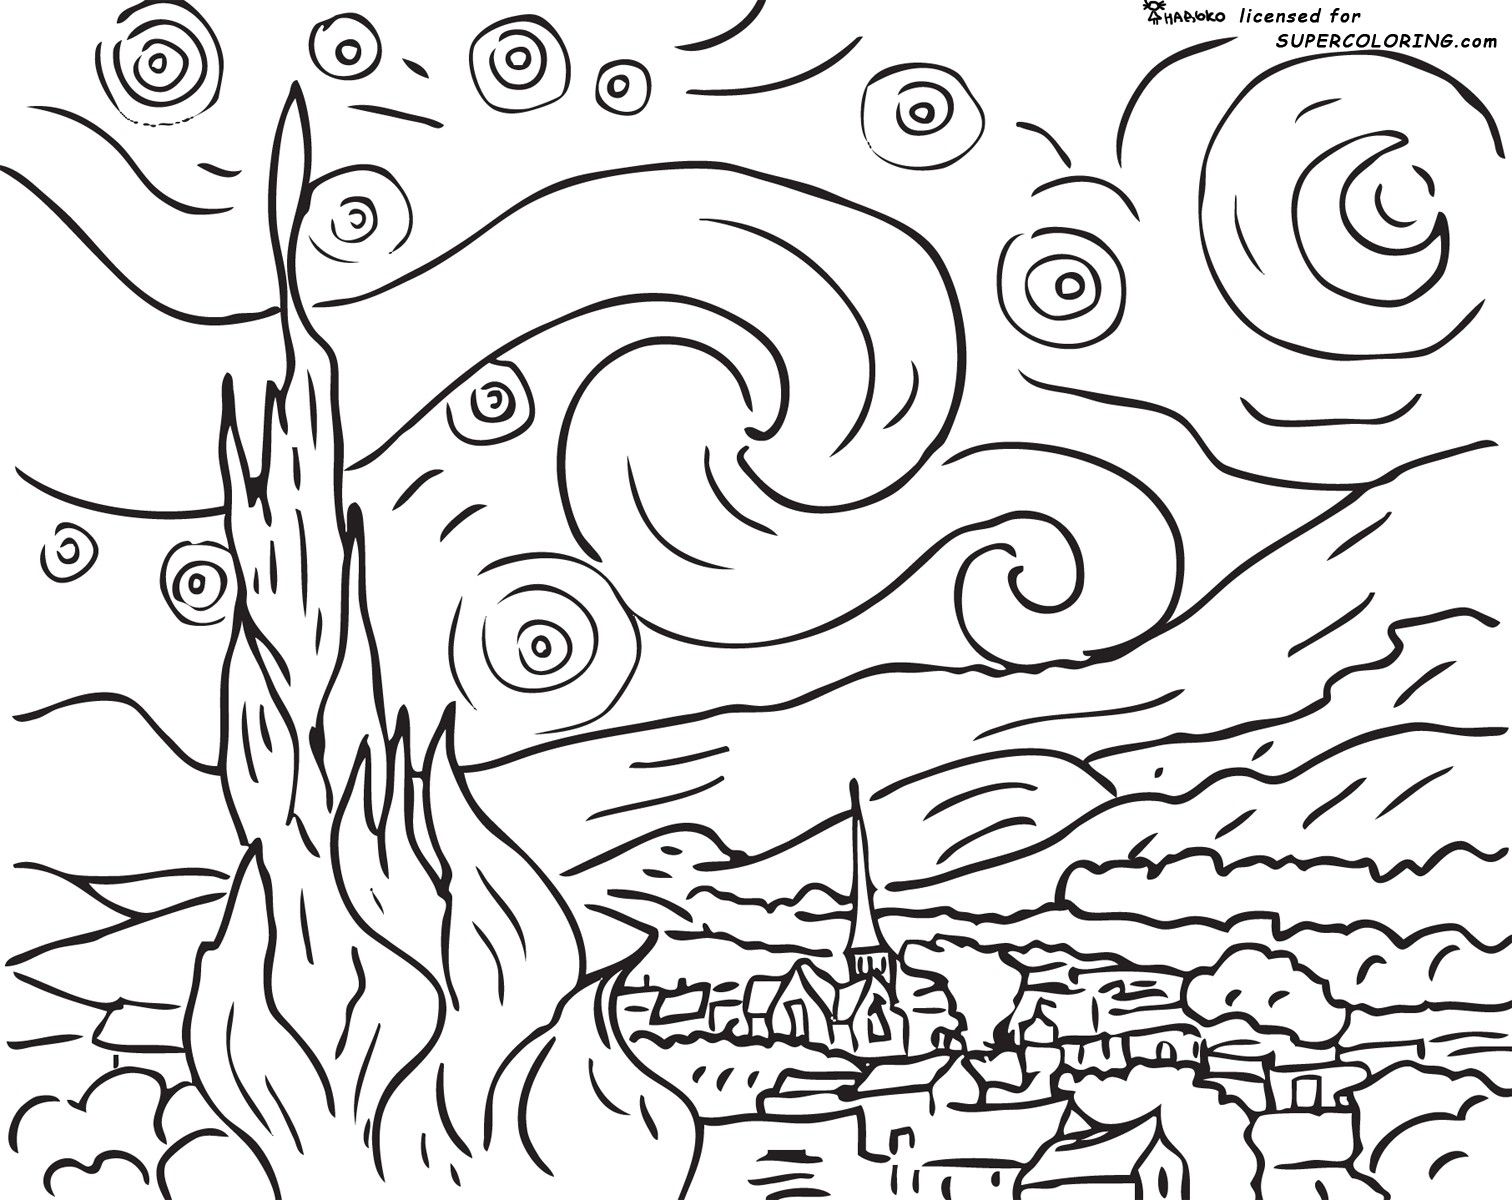 Cool Coloring Patterns - Coloring Pages for Kids and for Adults